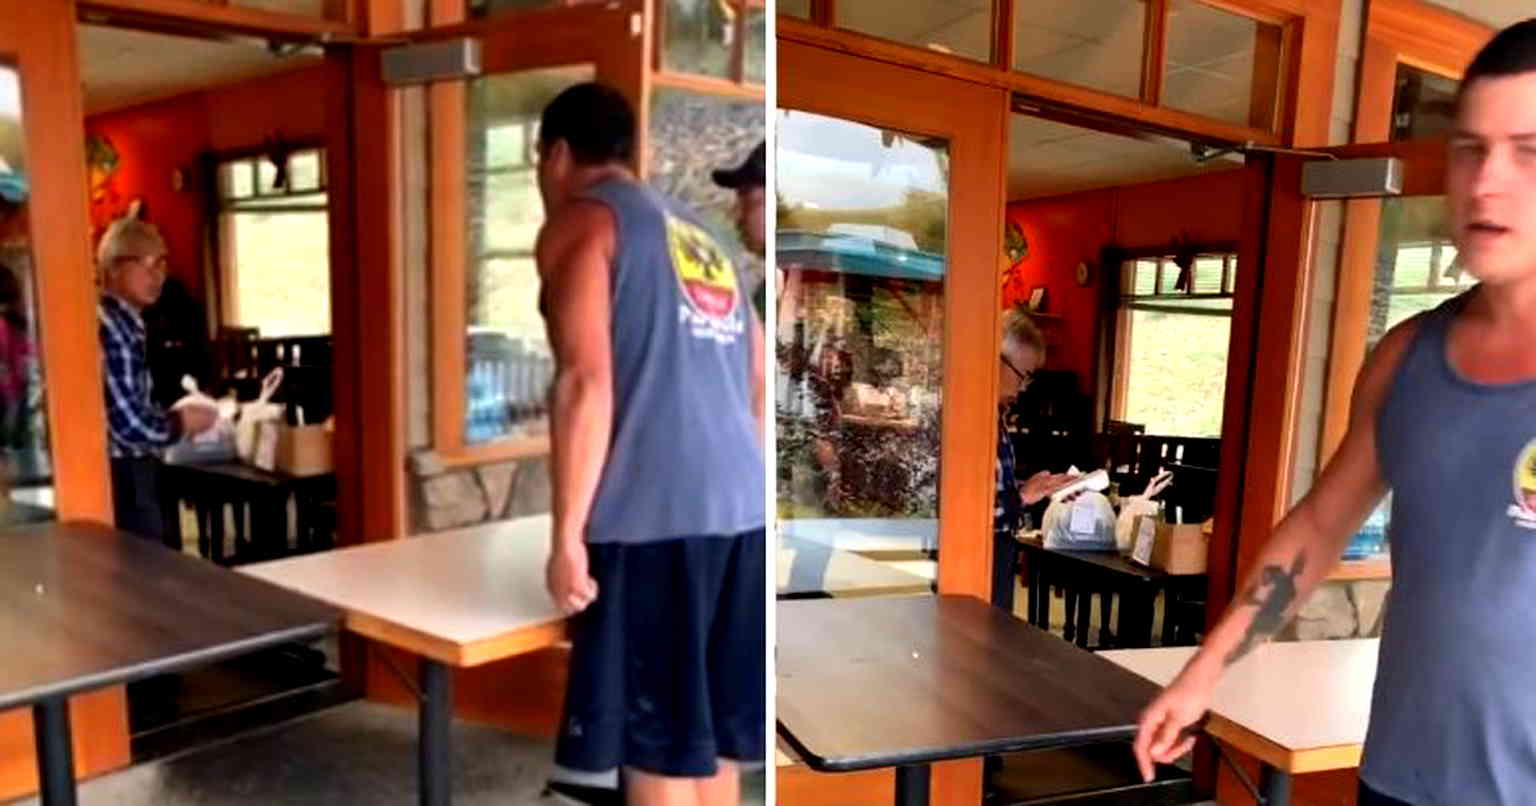 Canadian Man Caught on Video Screaming at Elderly Chinese Restaurant Worker Over Wait Time